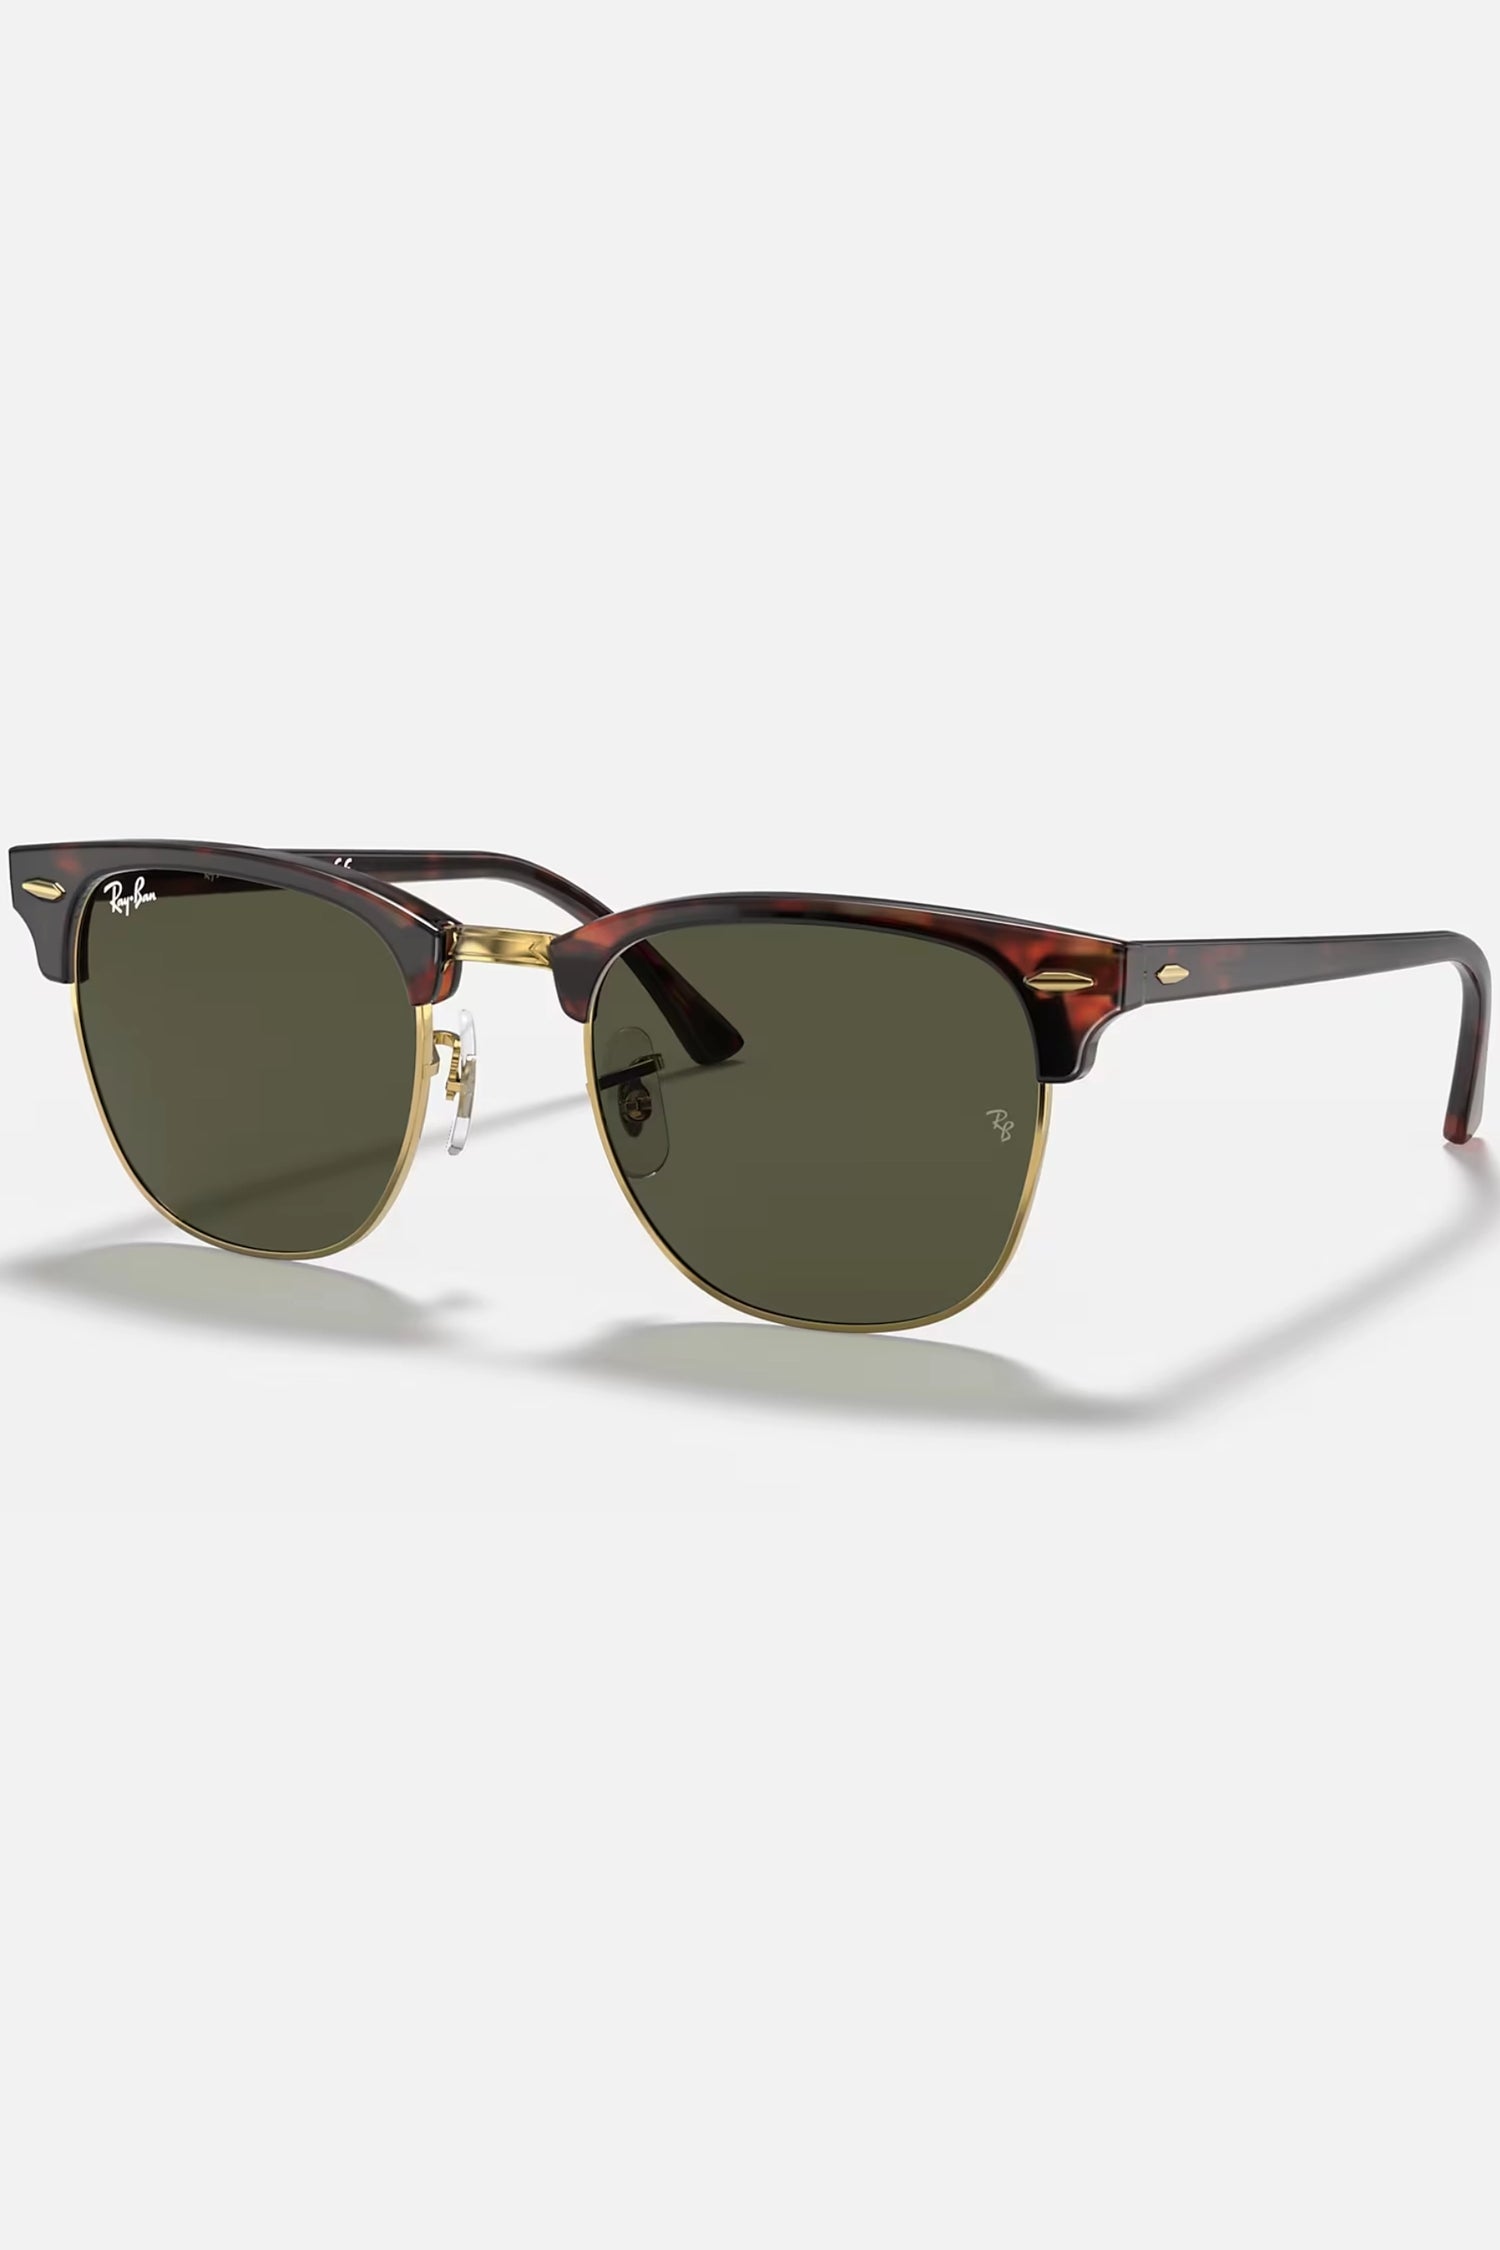 Ray-Ban RB3016 W0366 51 Clubmaster